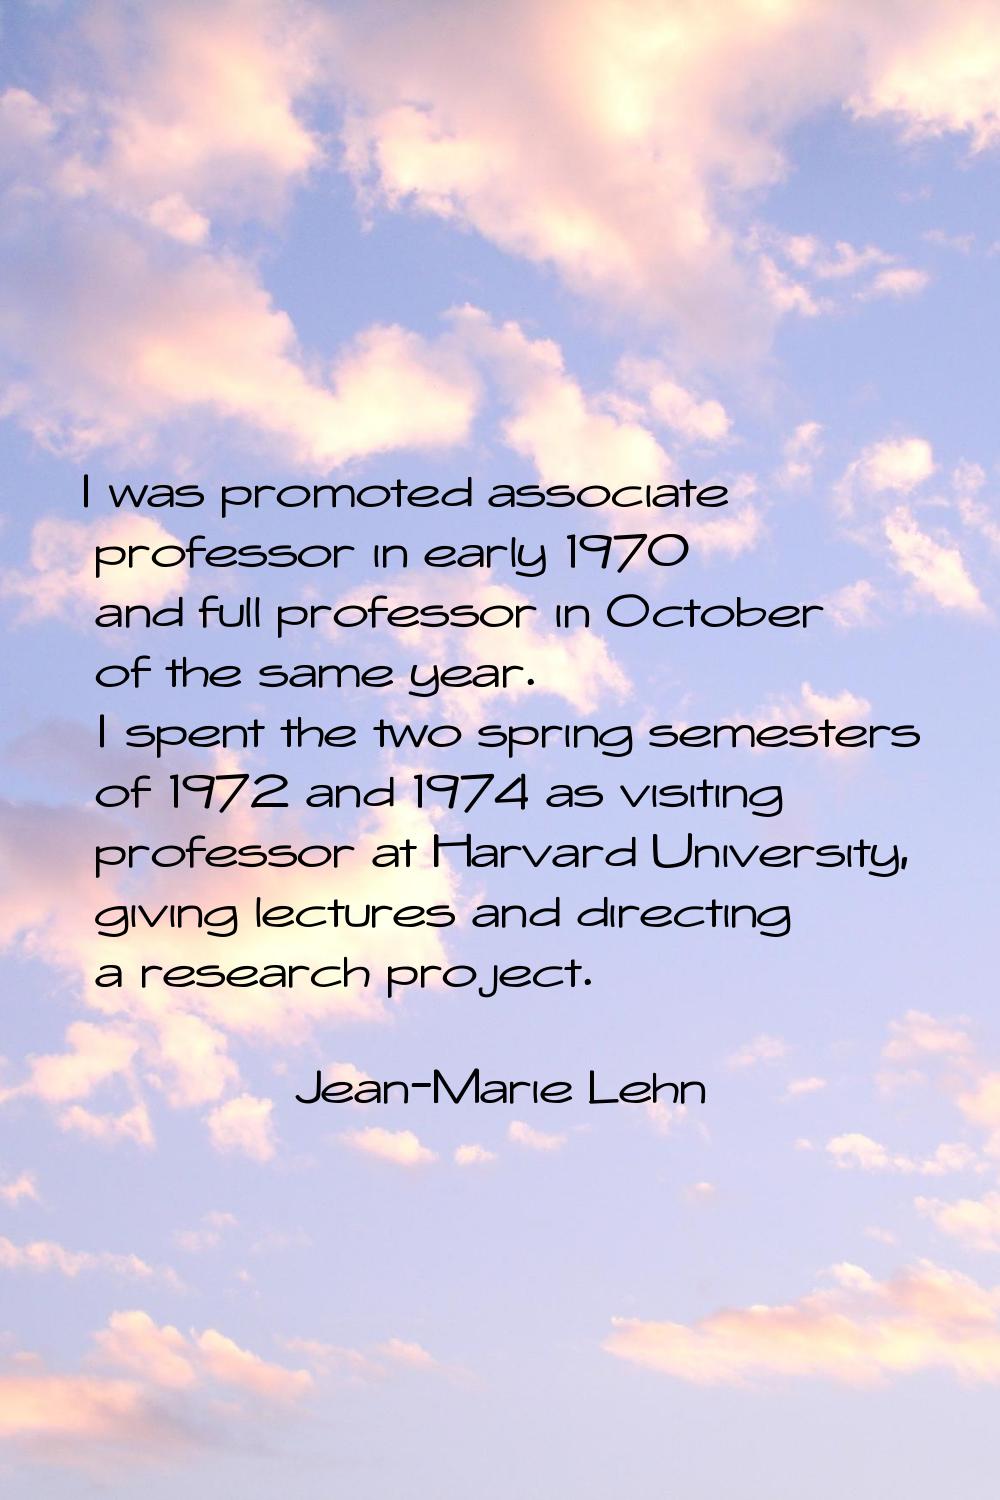 I was promoted associate professor in early 1970 and full professor in October of the same year. I 